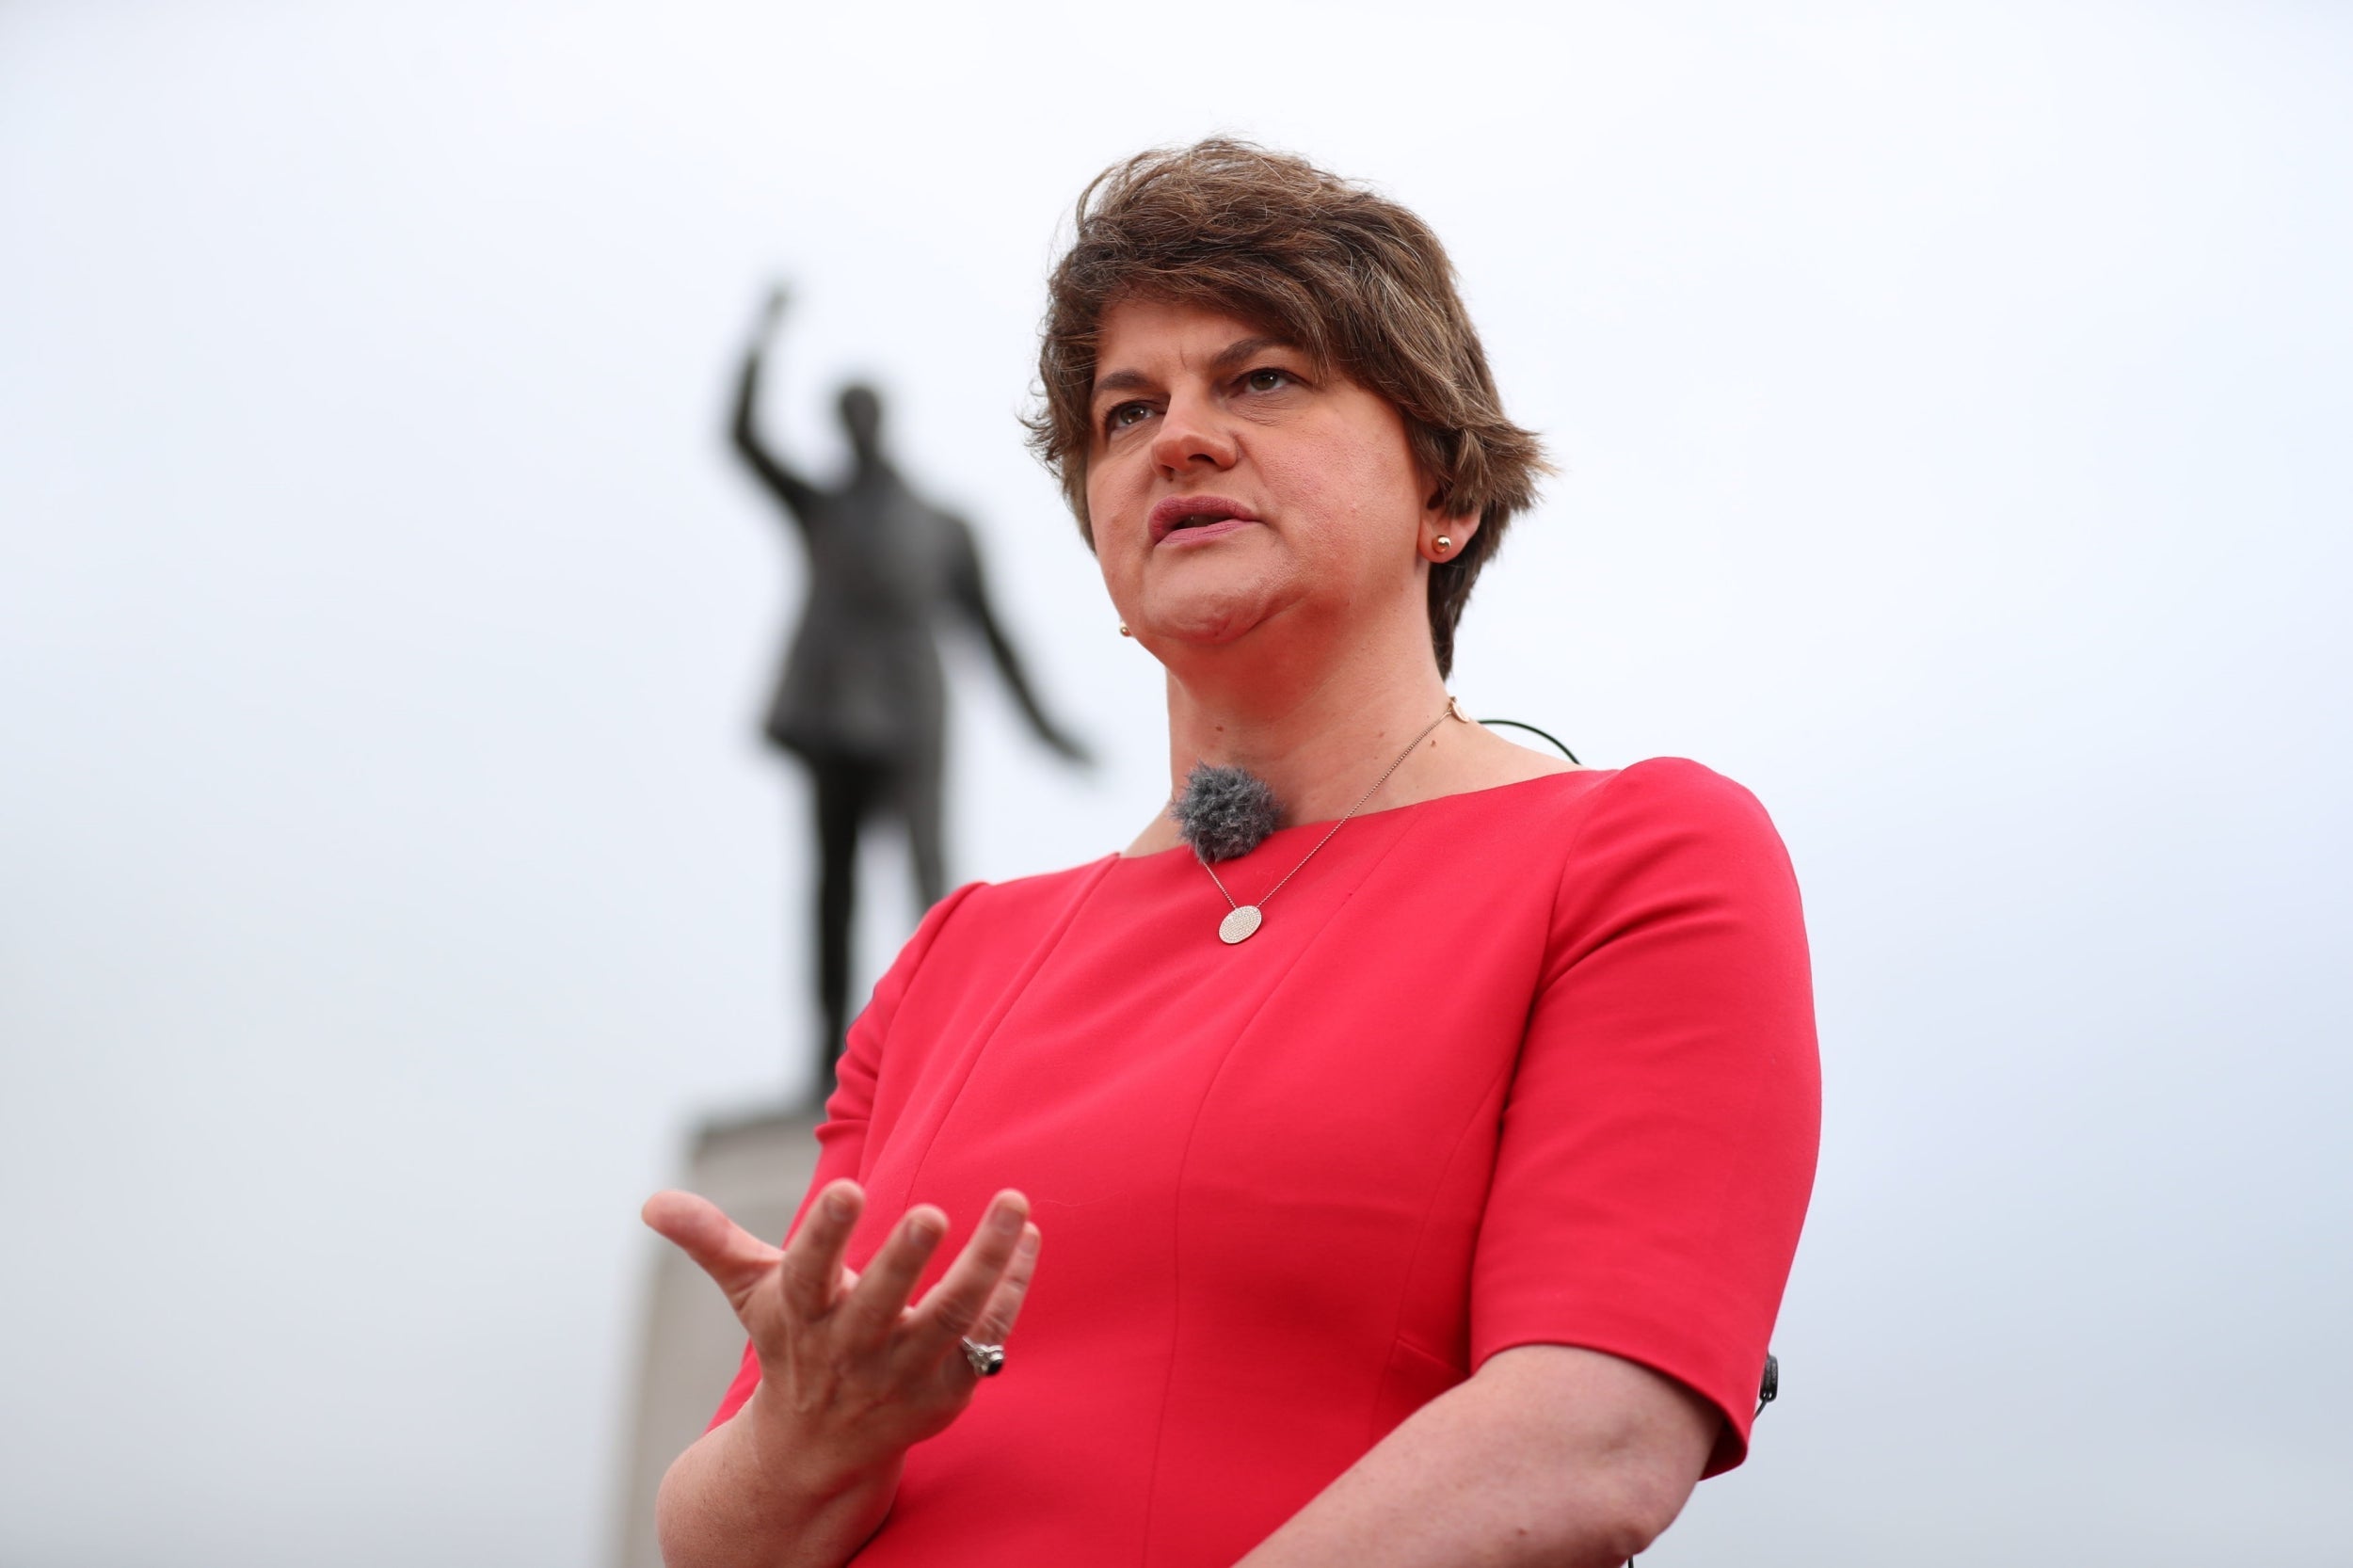 Arlene Foster, the DUP leader, dined with Mr Johnson ahead of the talks